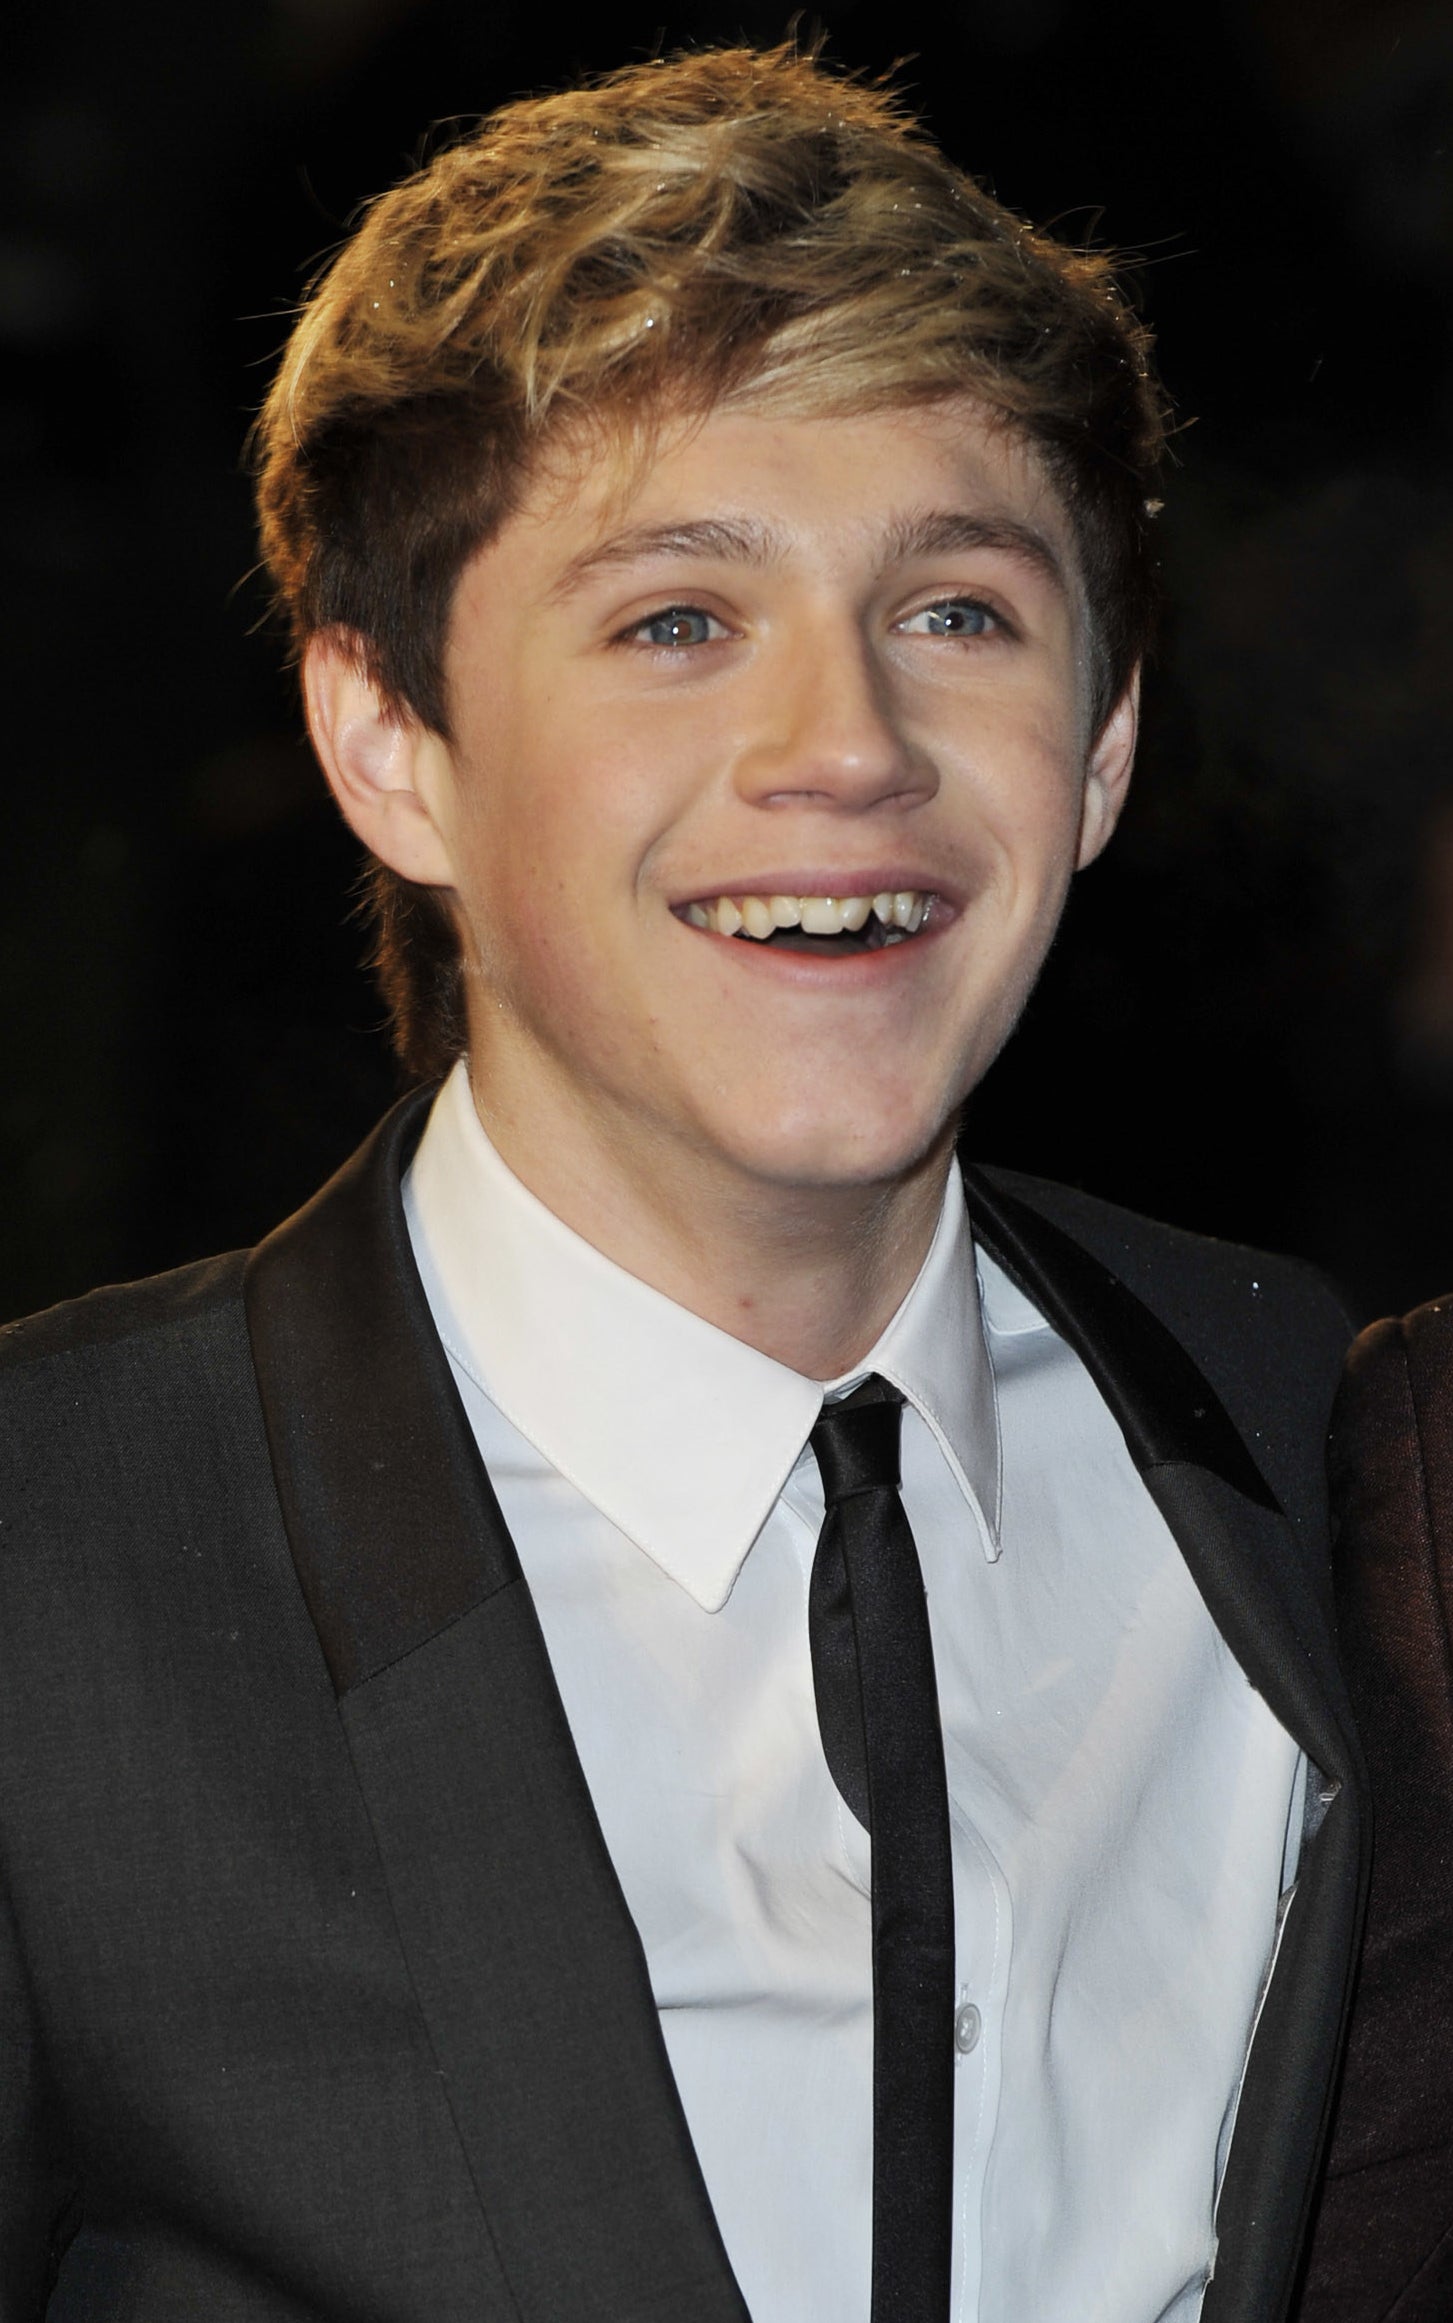 Niall Horan attending a movie premiere in 2010